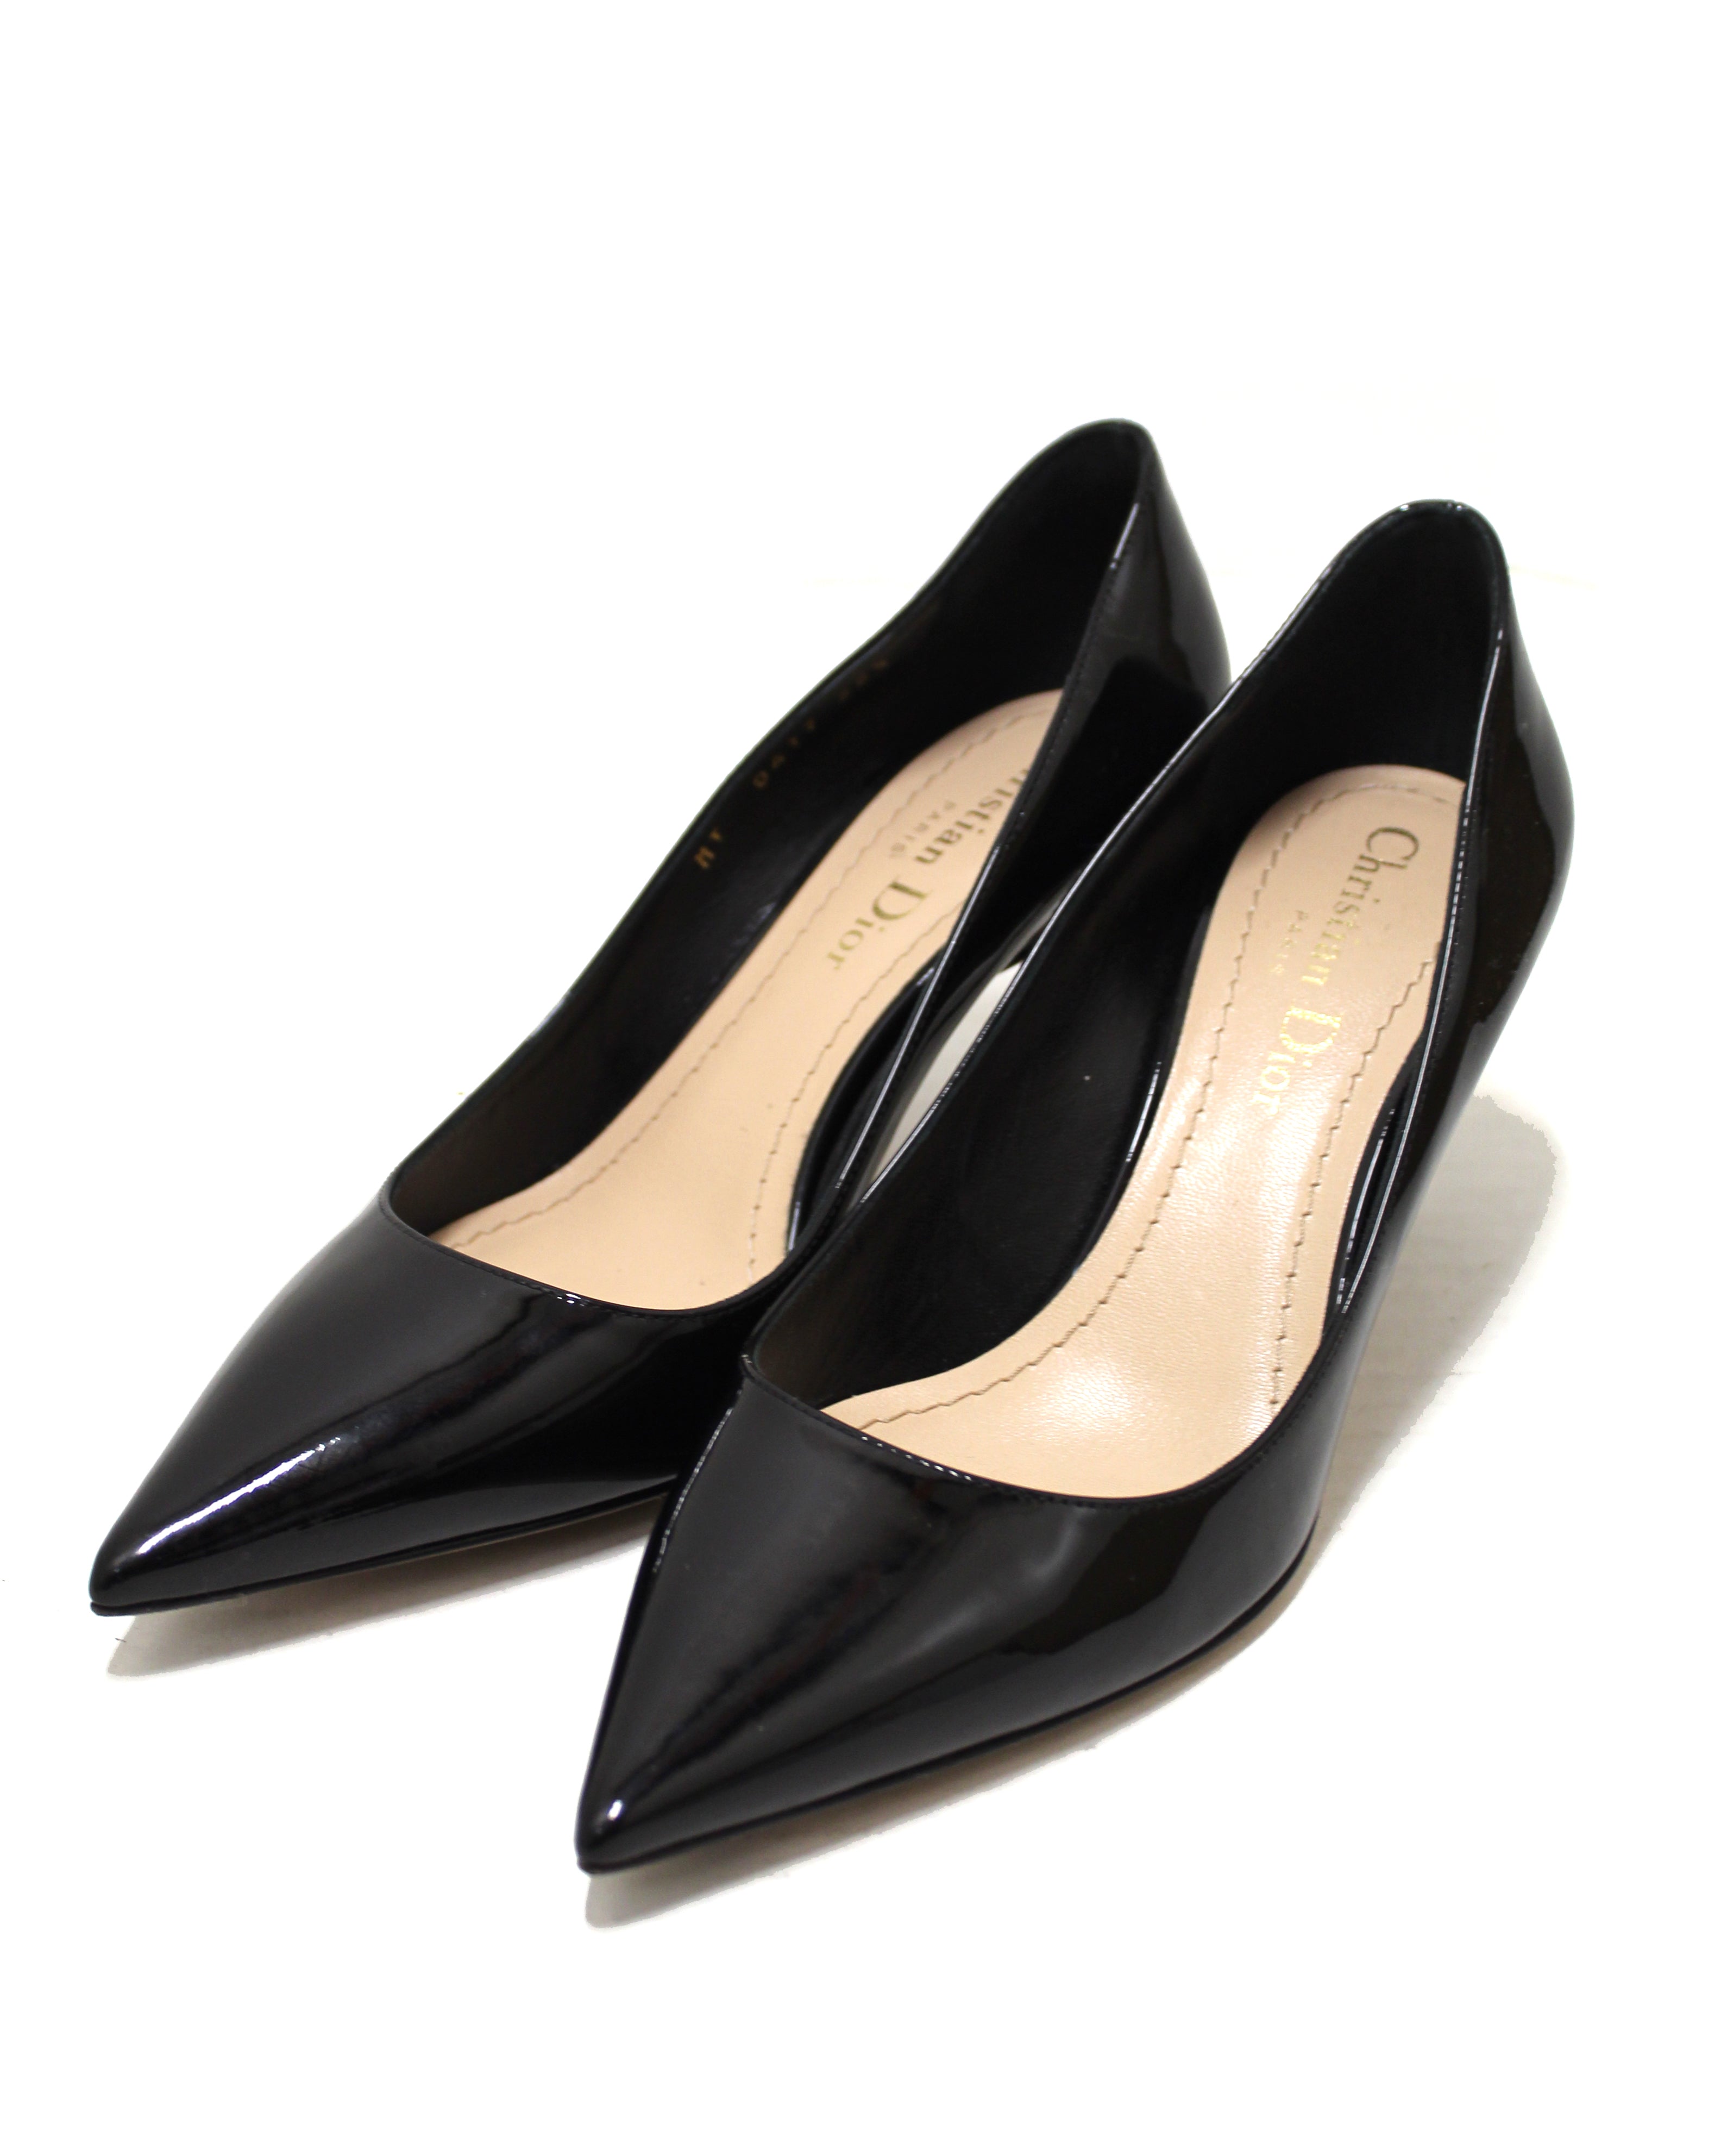 Authentic Christian Dior Black Patent Leather Pointed Toe Pumps Size 35.5